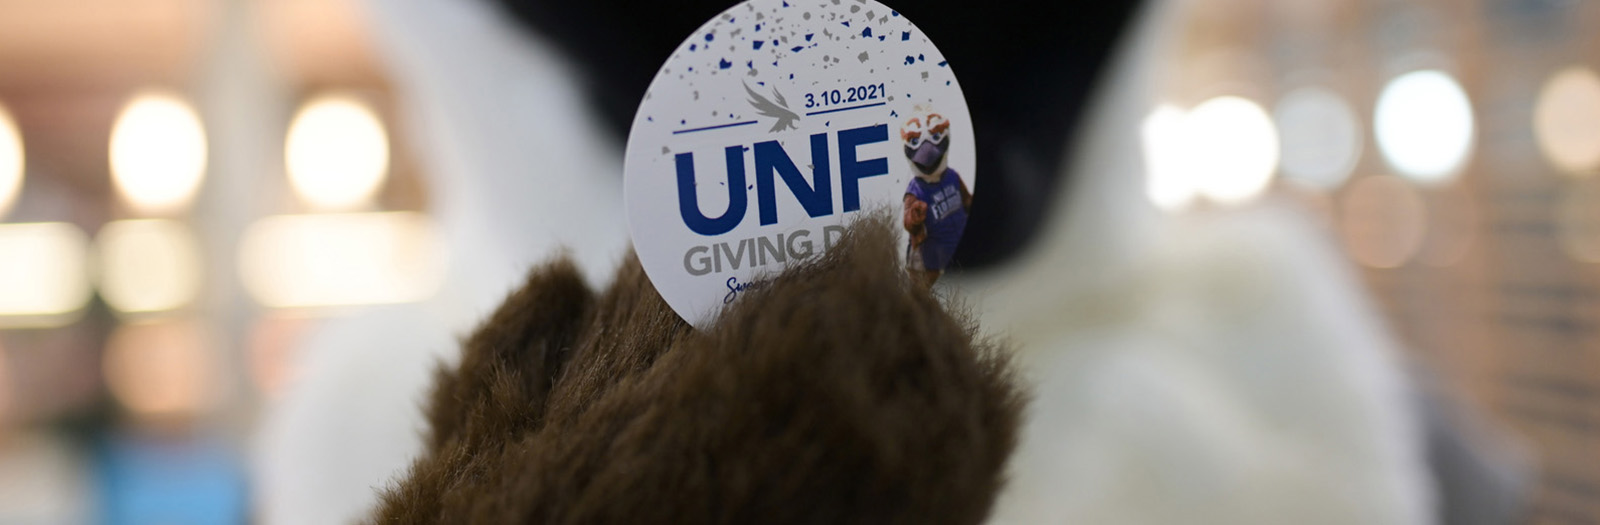 Ozzie with giving day sticker